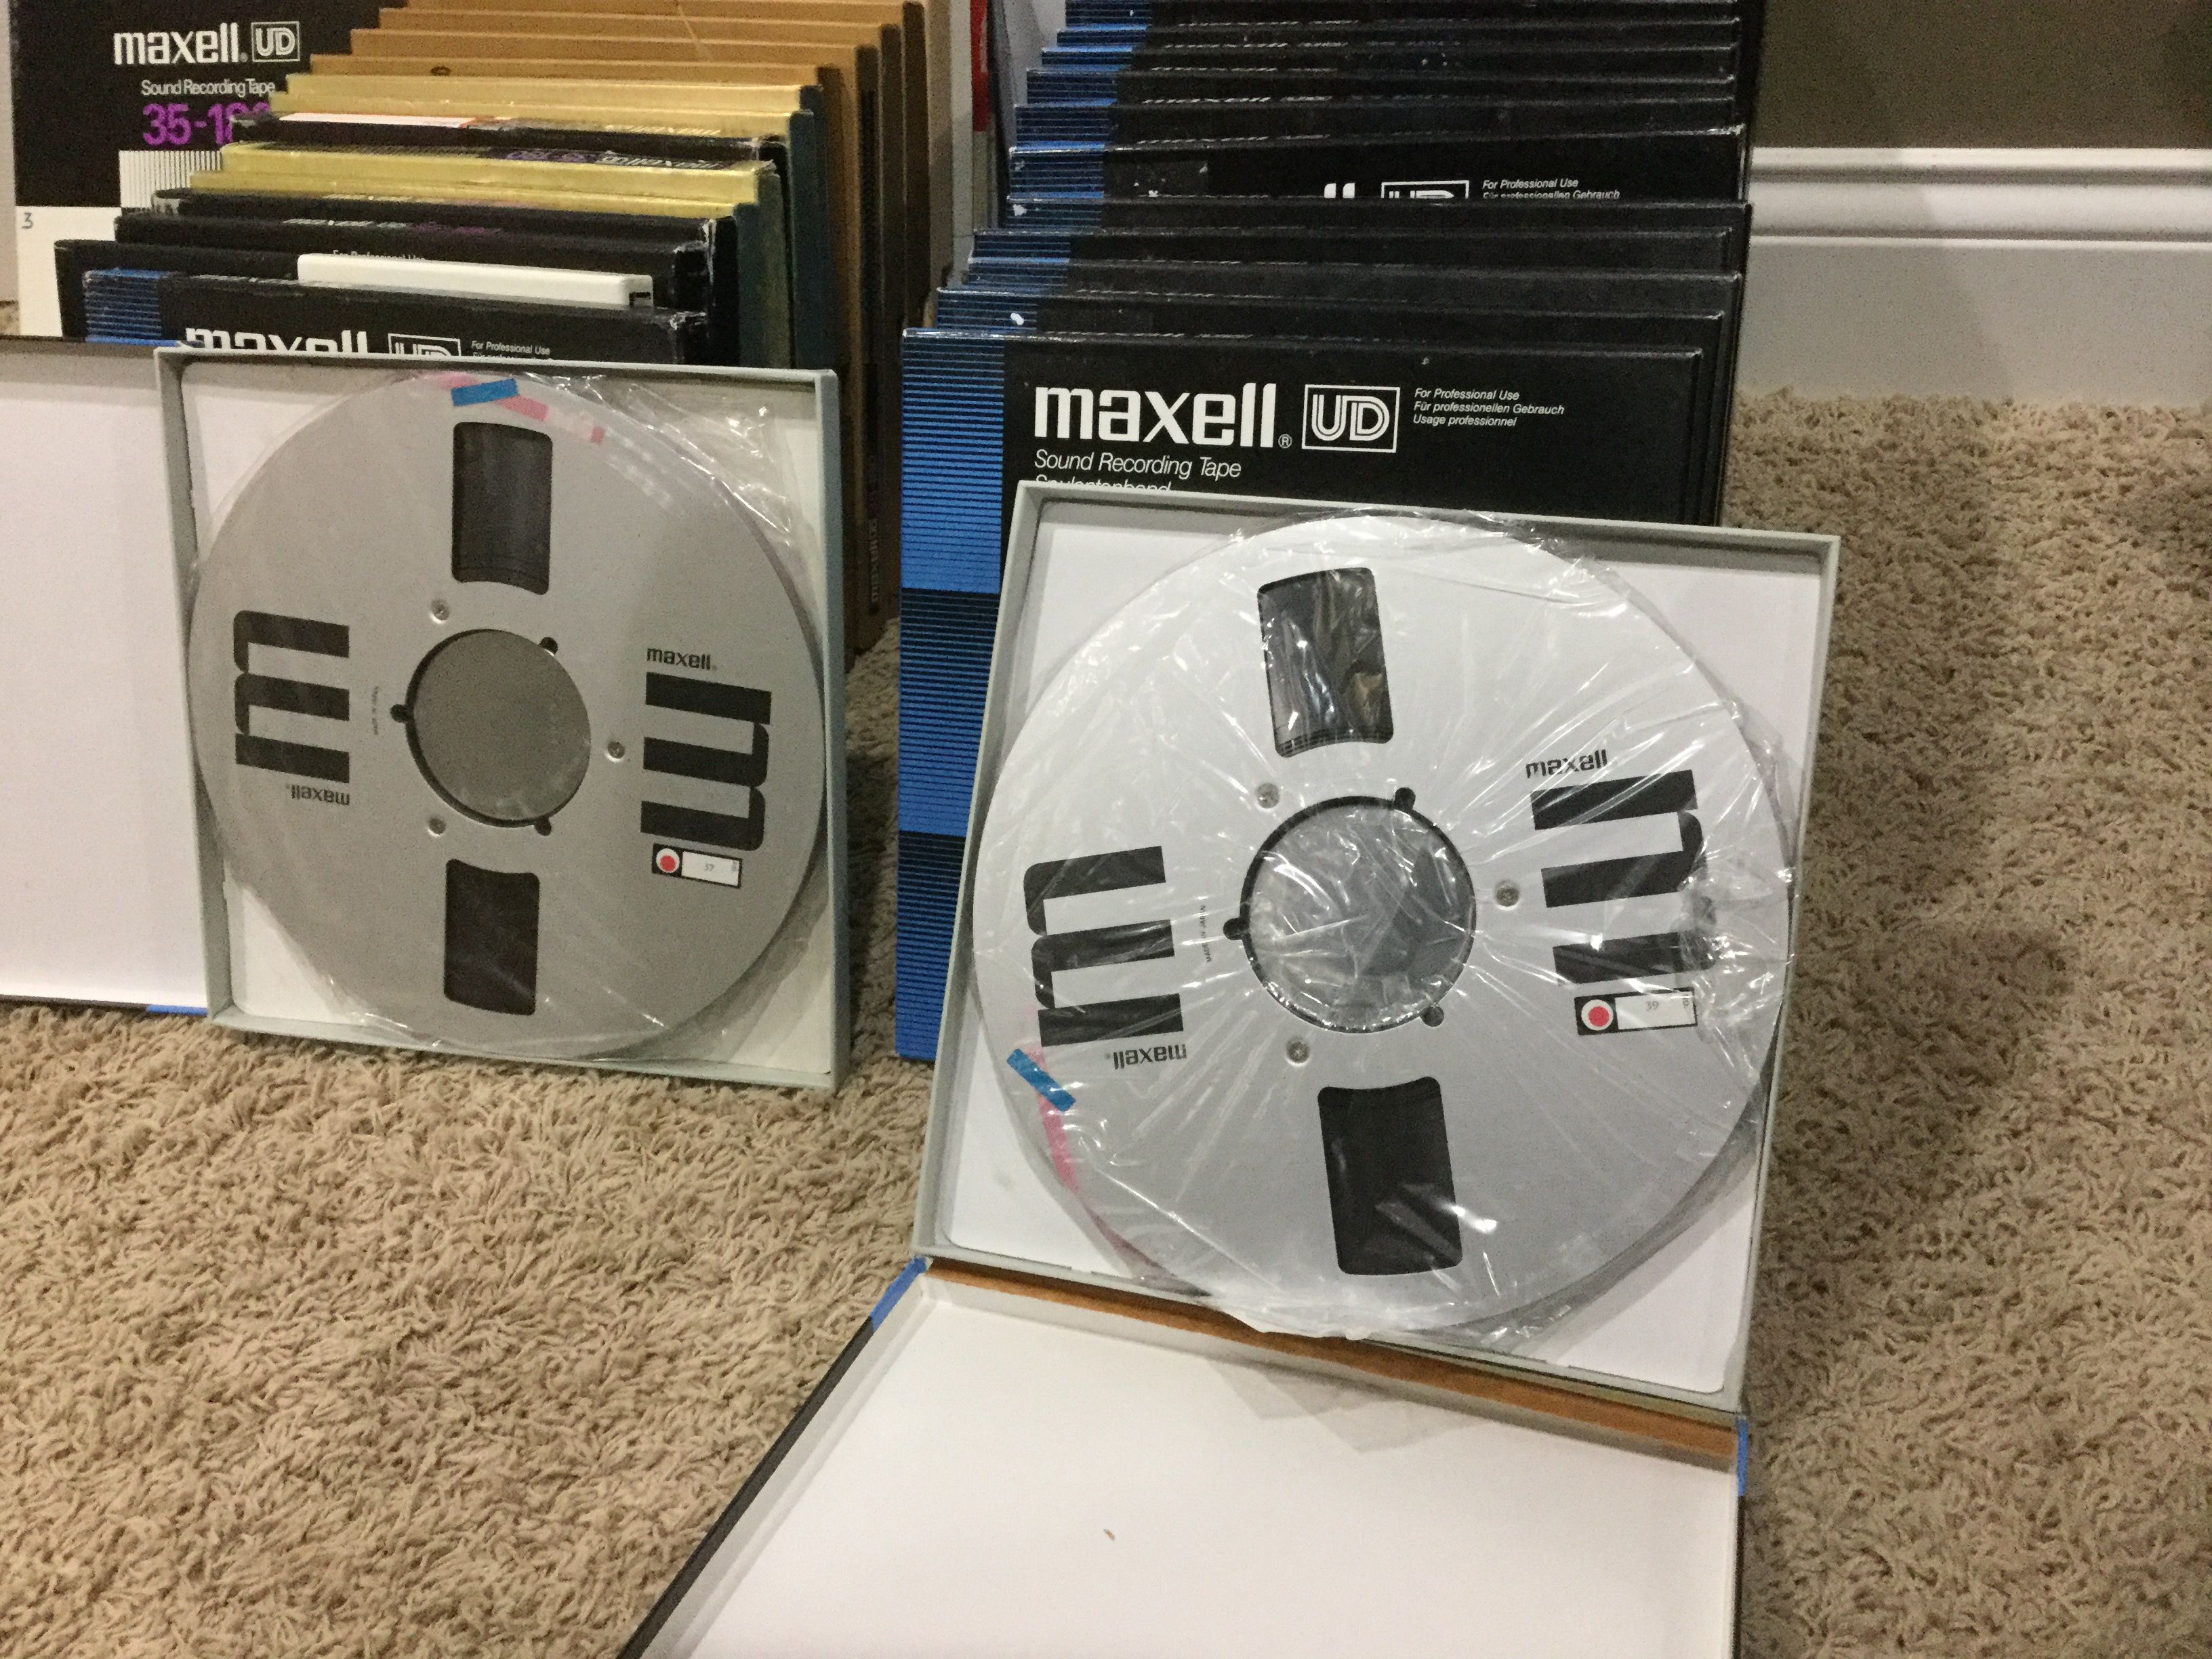 Maxell 10 inch 35-180 reel to reel tape Photo #1419590 - Canuck